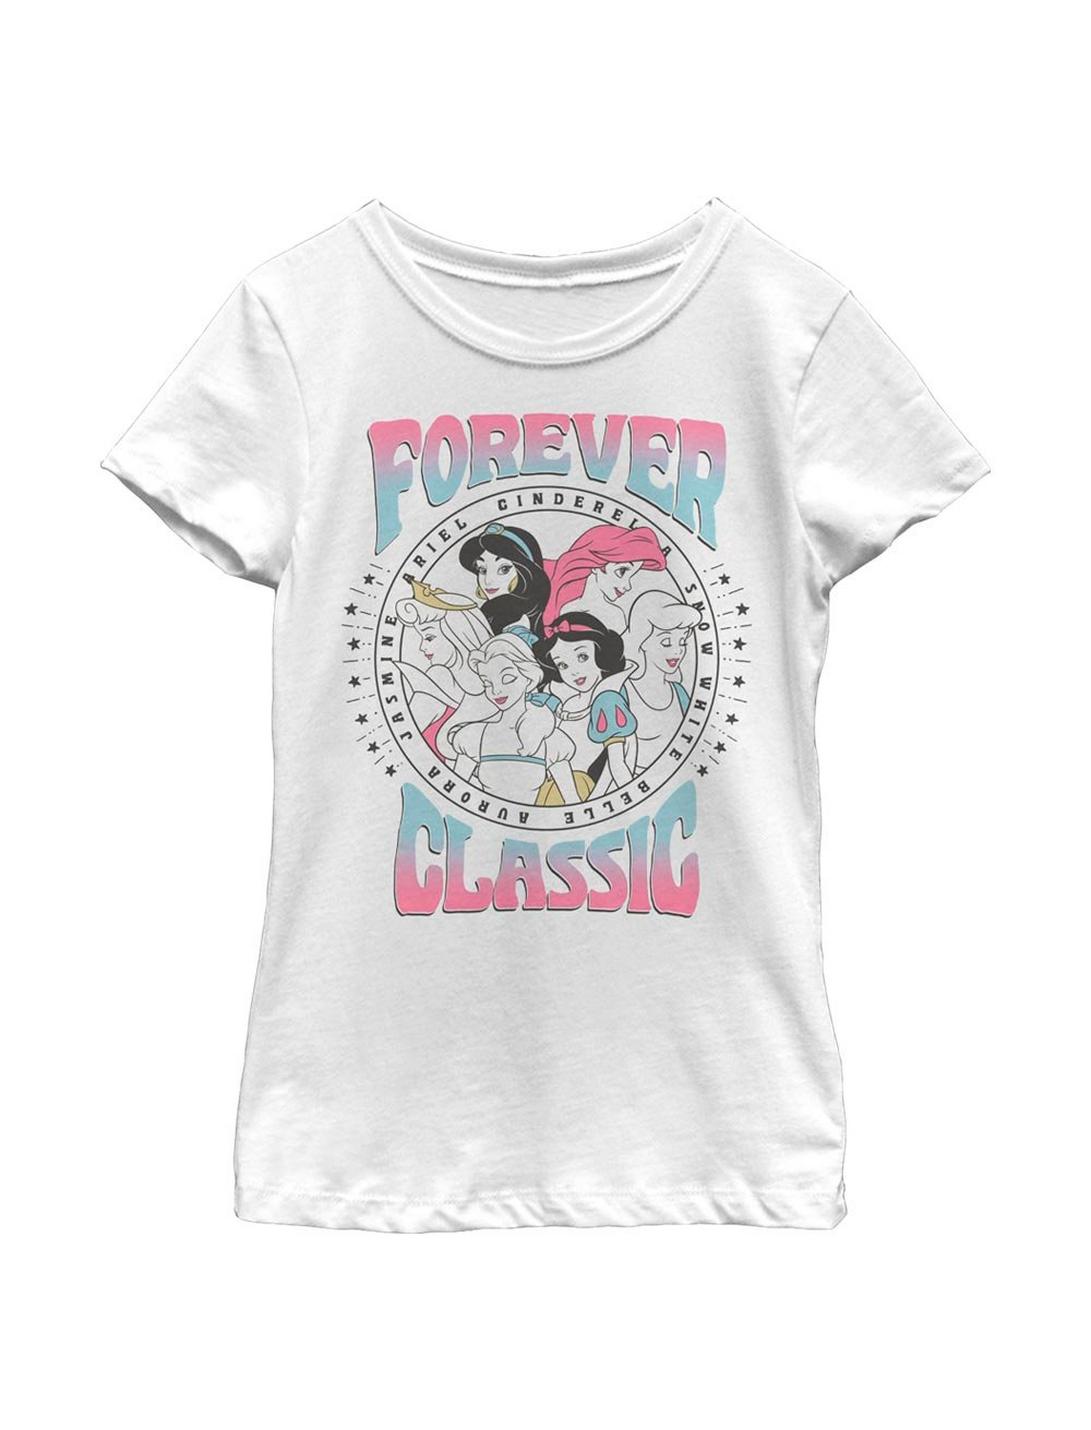 Disney Princesses Forever Classic Youth Girls T-Shirt, WHITE, hi-res